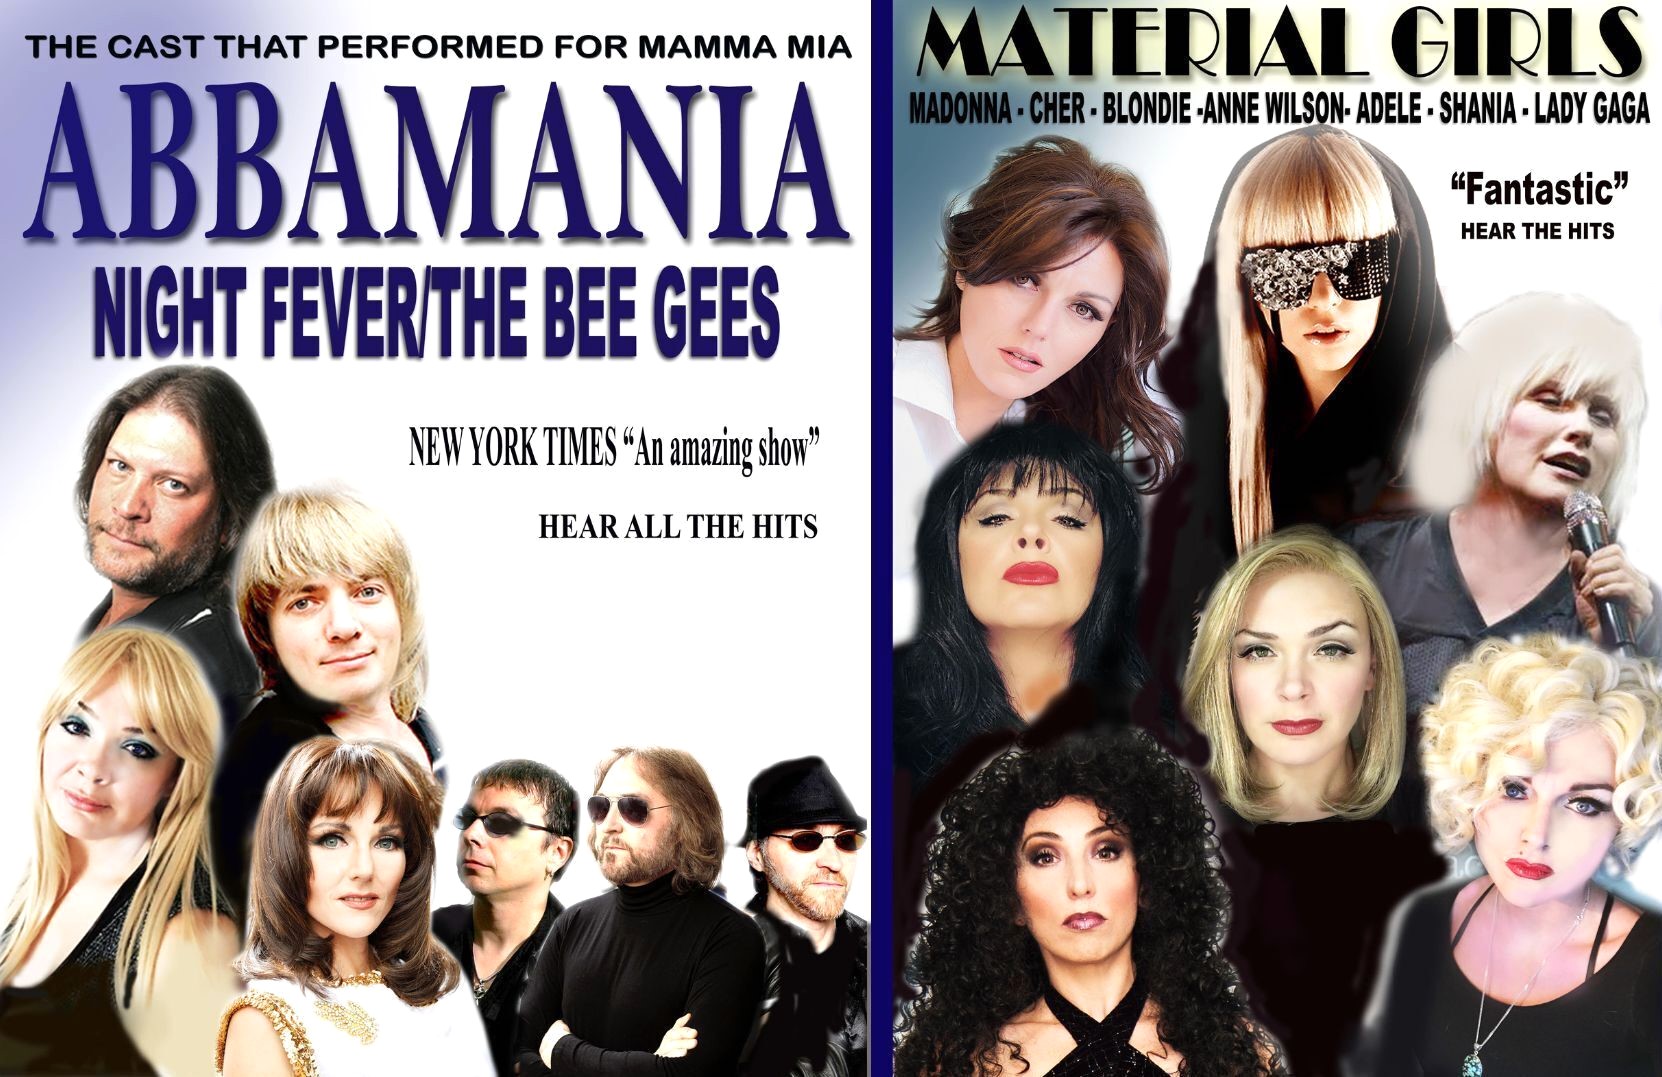 ABBAMANIA, Night Fever & Material Girls Subscription - Oh My!